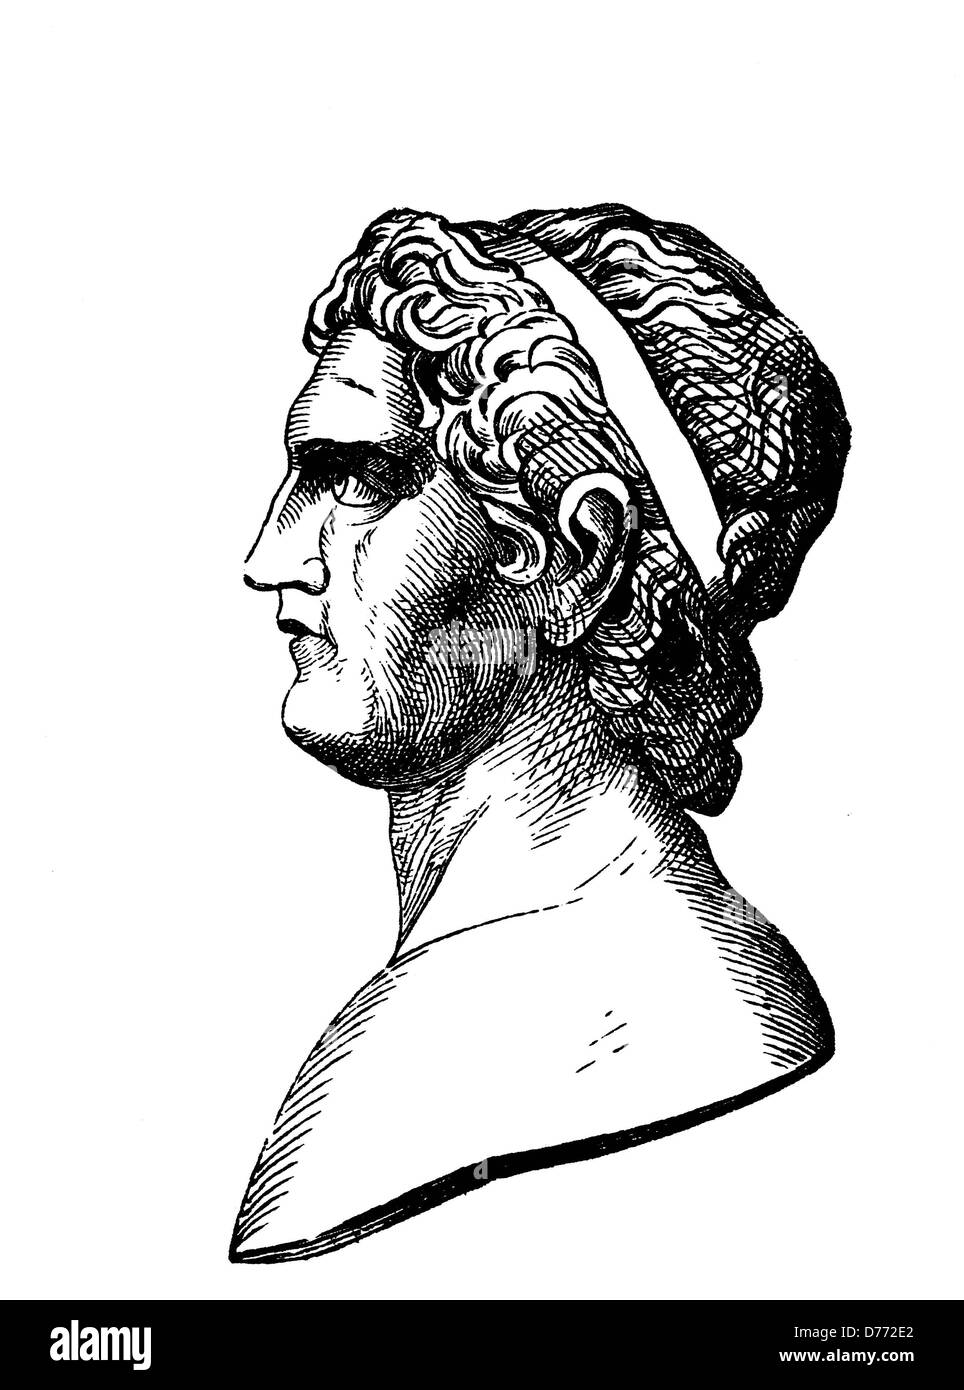 Ptolemaos I Lagis, Ptolemaois, 367 BC - 282 BC, General of Alexander the Great, historical woodcut, circa 1880 Stock Photo